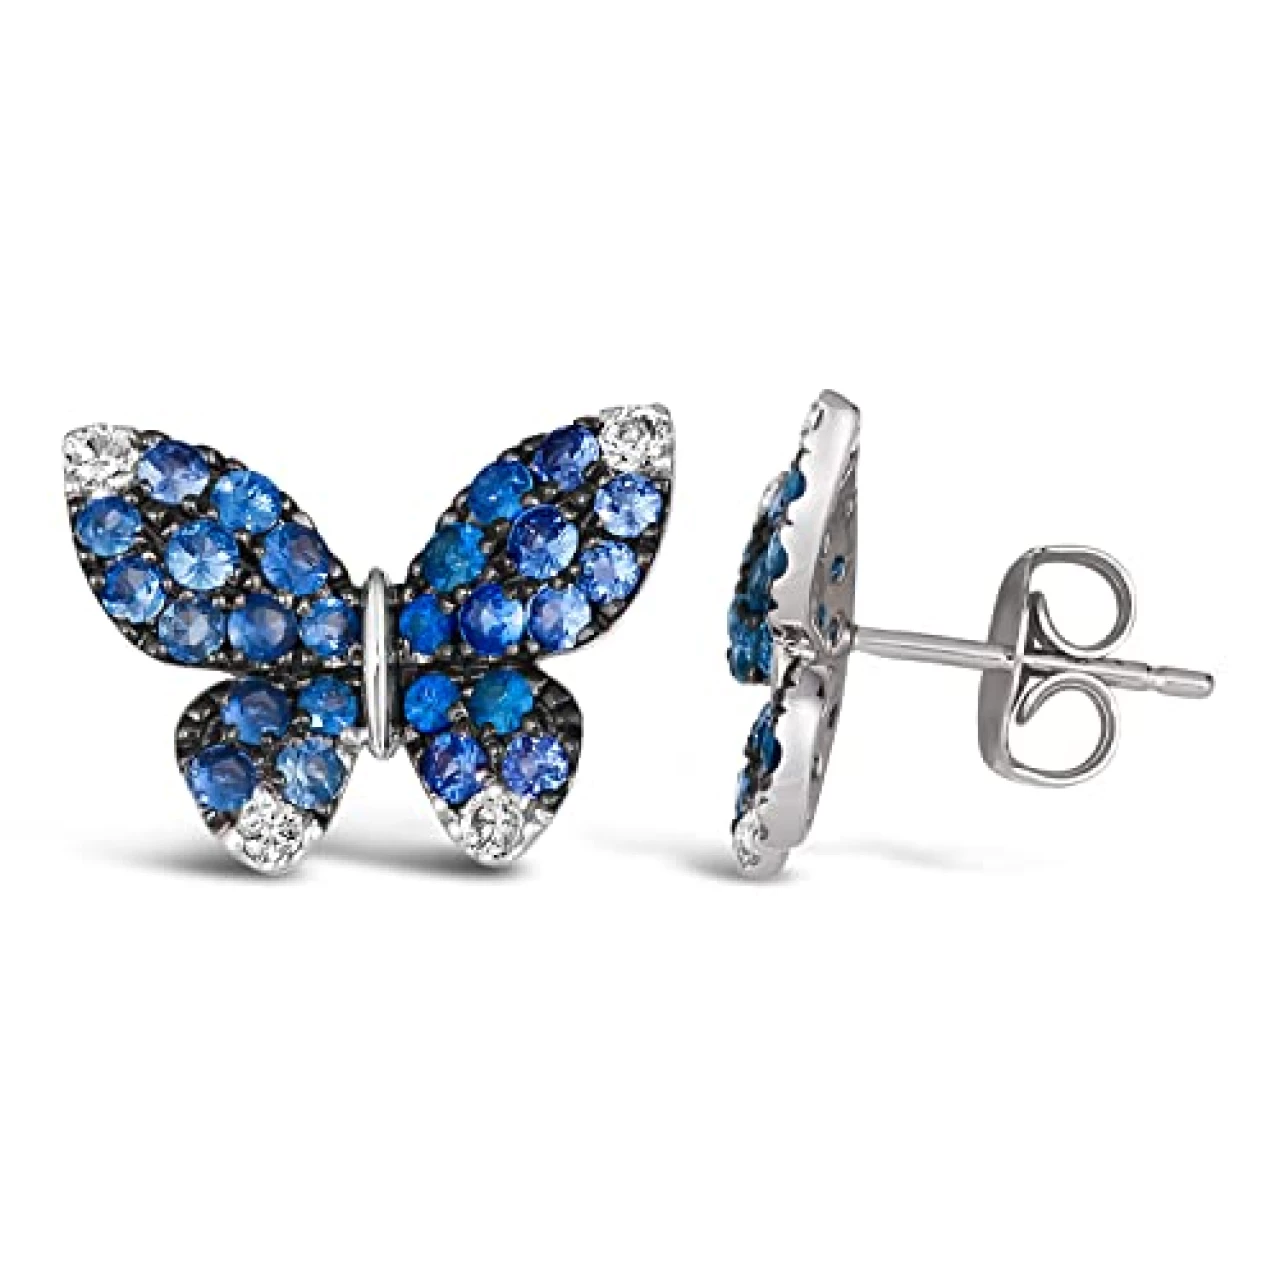 1 2/5 Carat White and Blue Sapphire Butterfly Stud Earrings for Women in 14k White Gold Studs with Push Back by LeVian